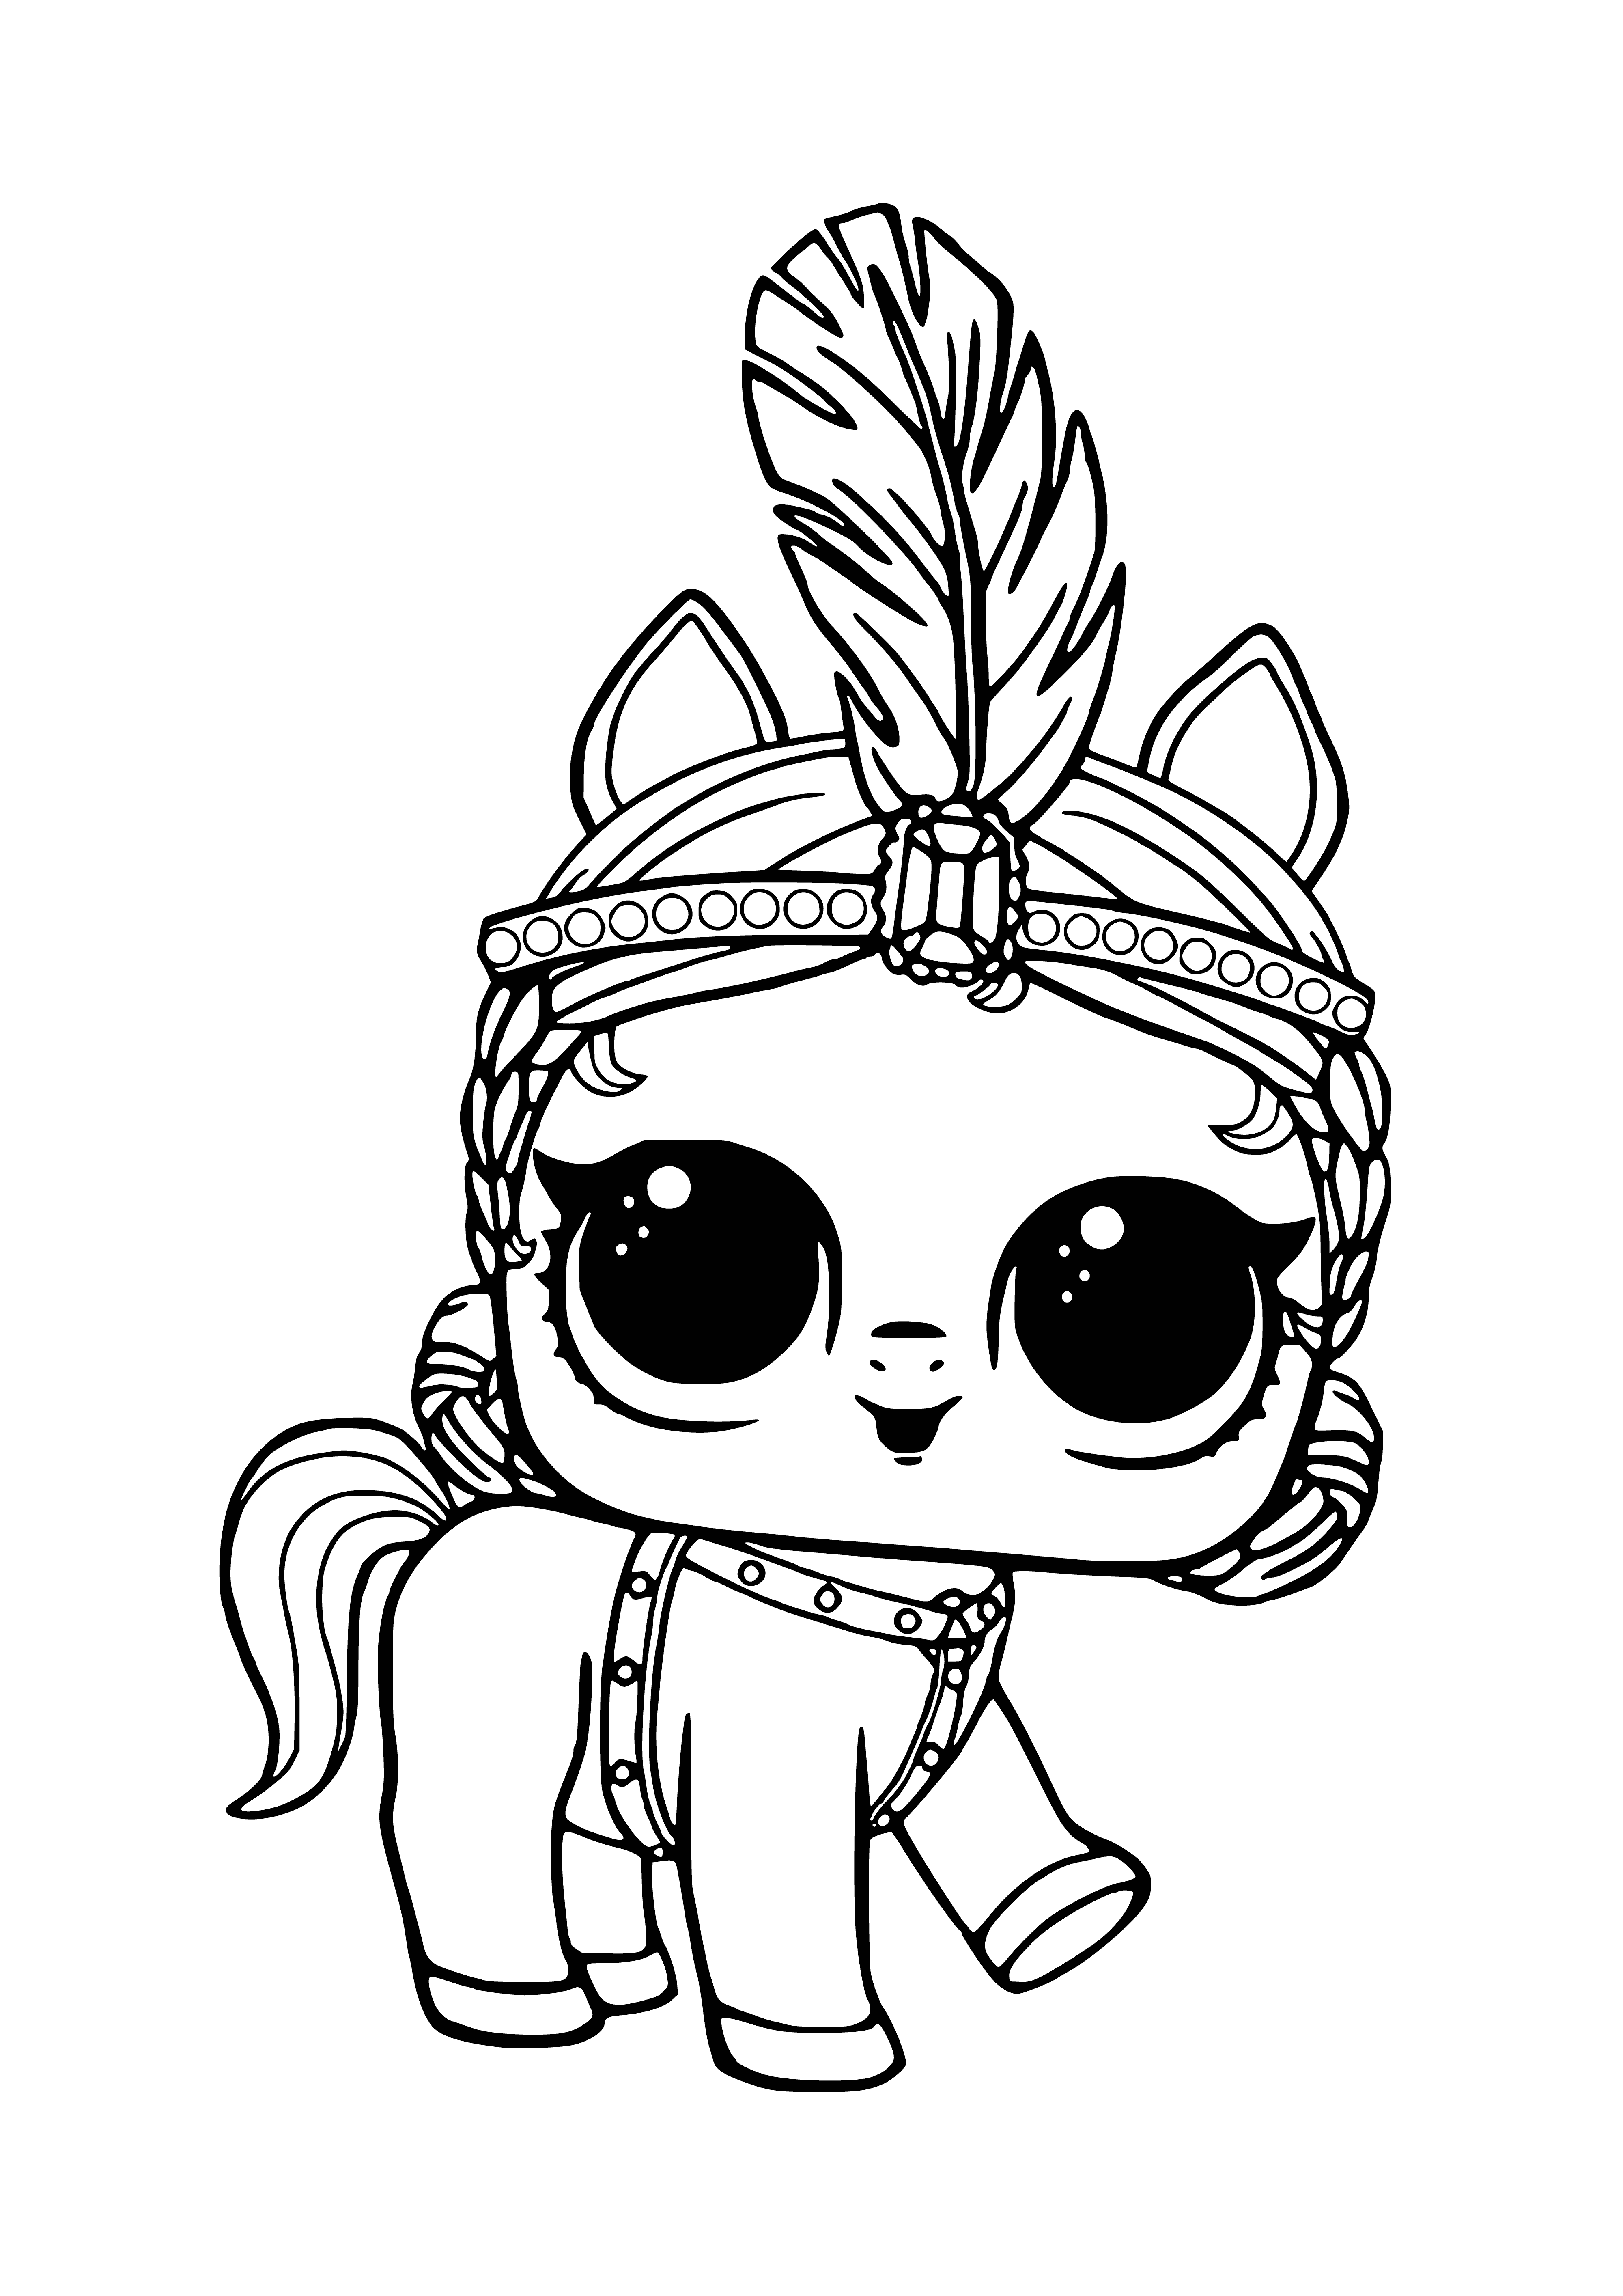 coloring page: A blue horse with white mane, purple eyes, pink bow, and blue & white striped tail.